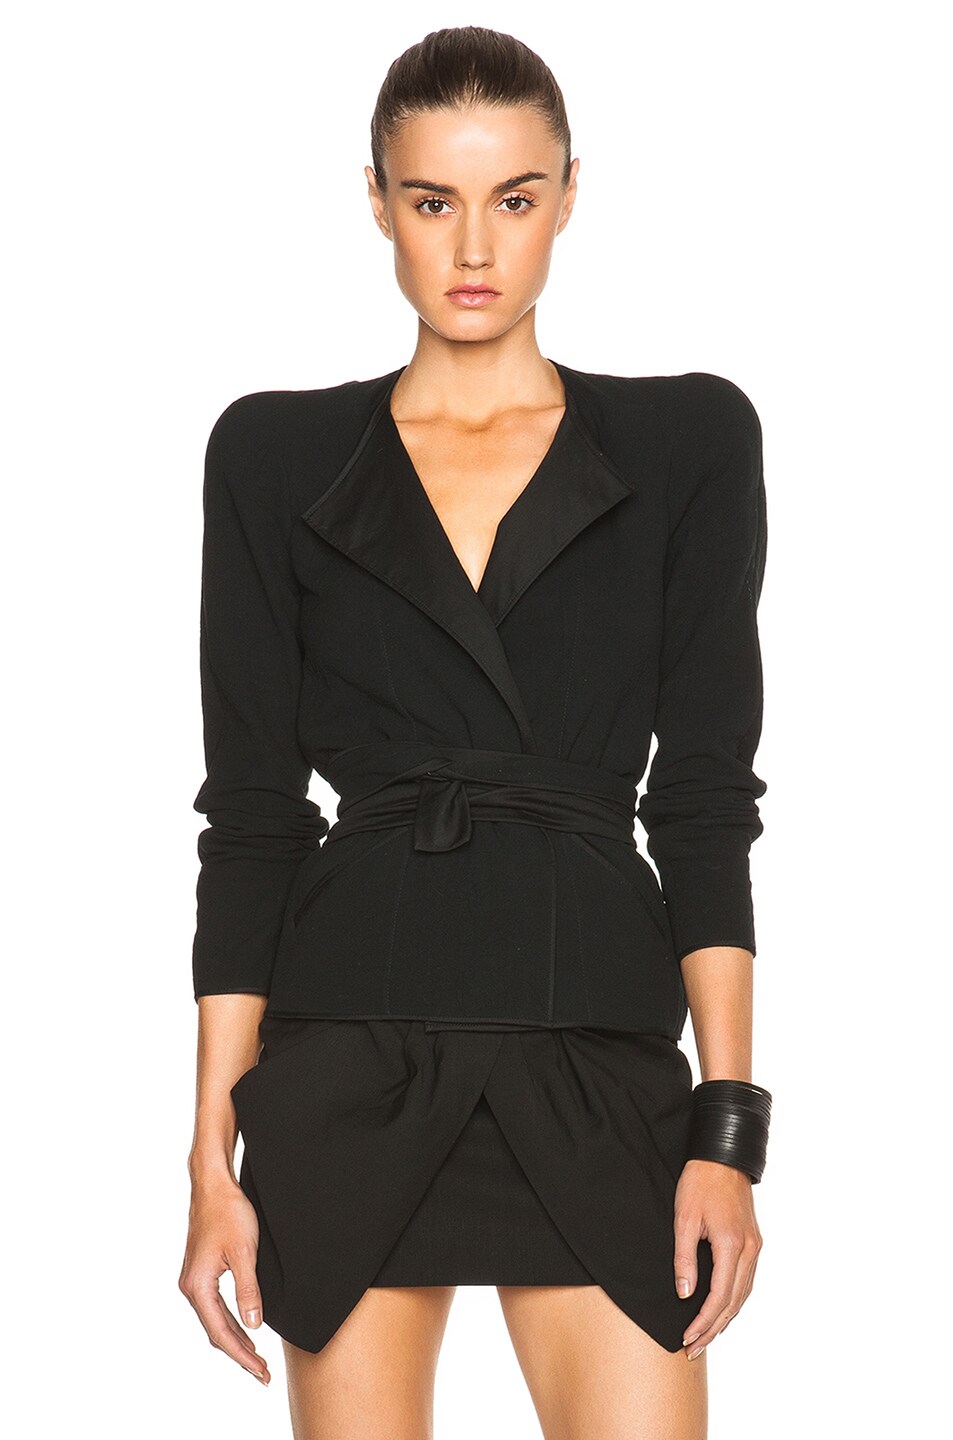 Isabel Marant Mable Tubique Cotton Jacket in Black | FWRD